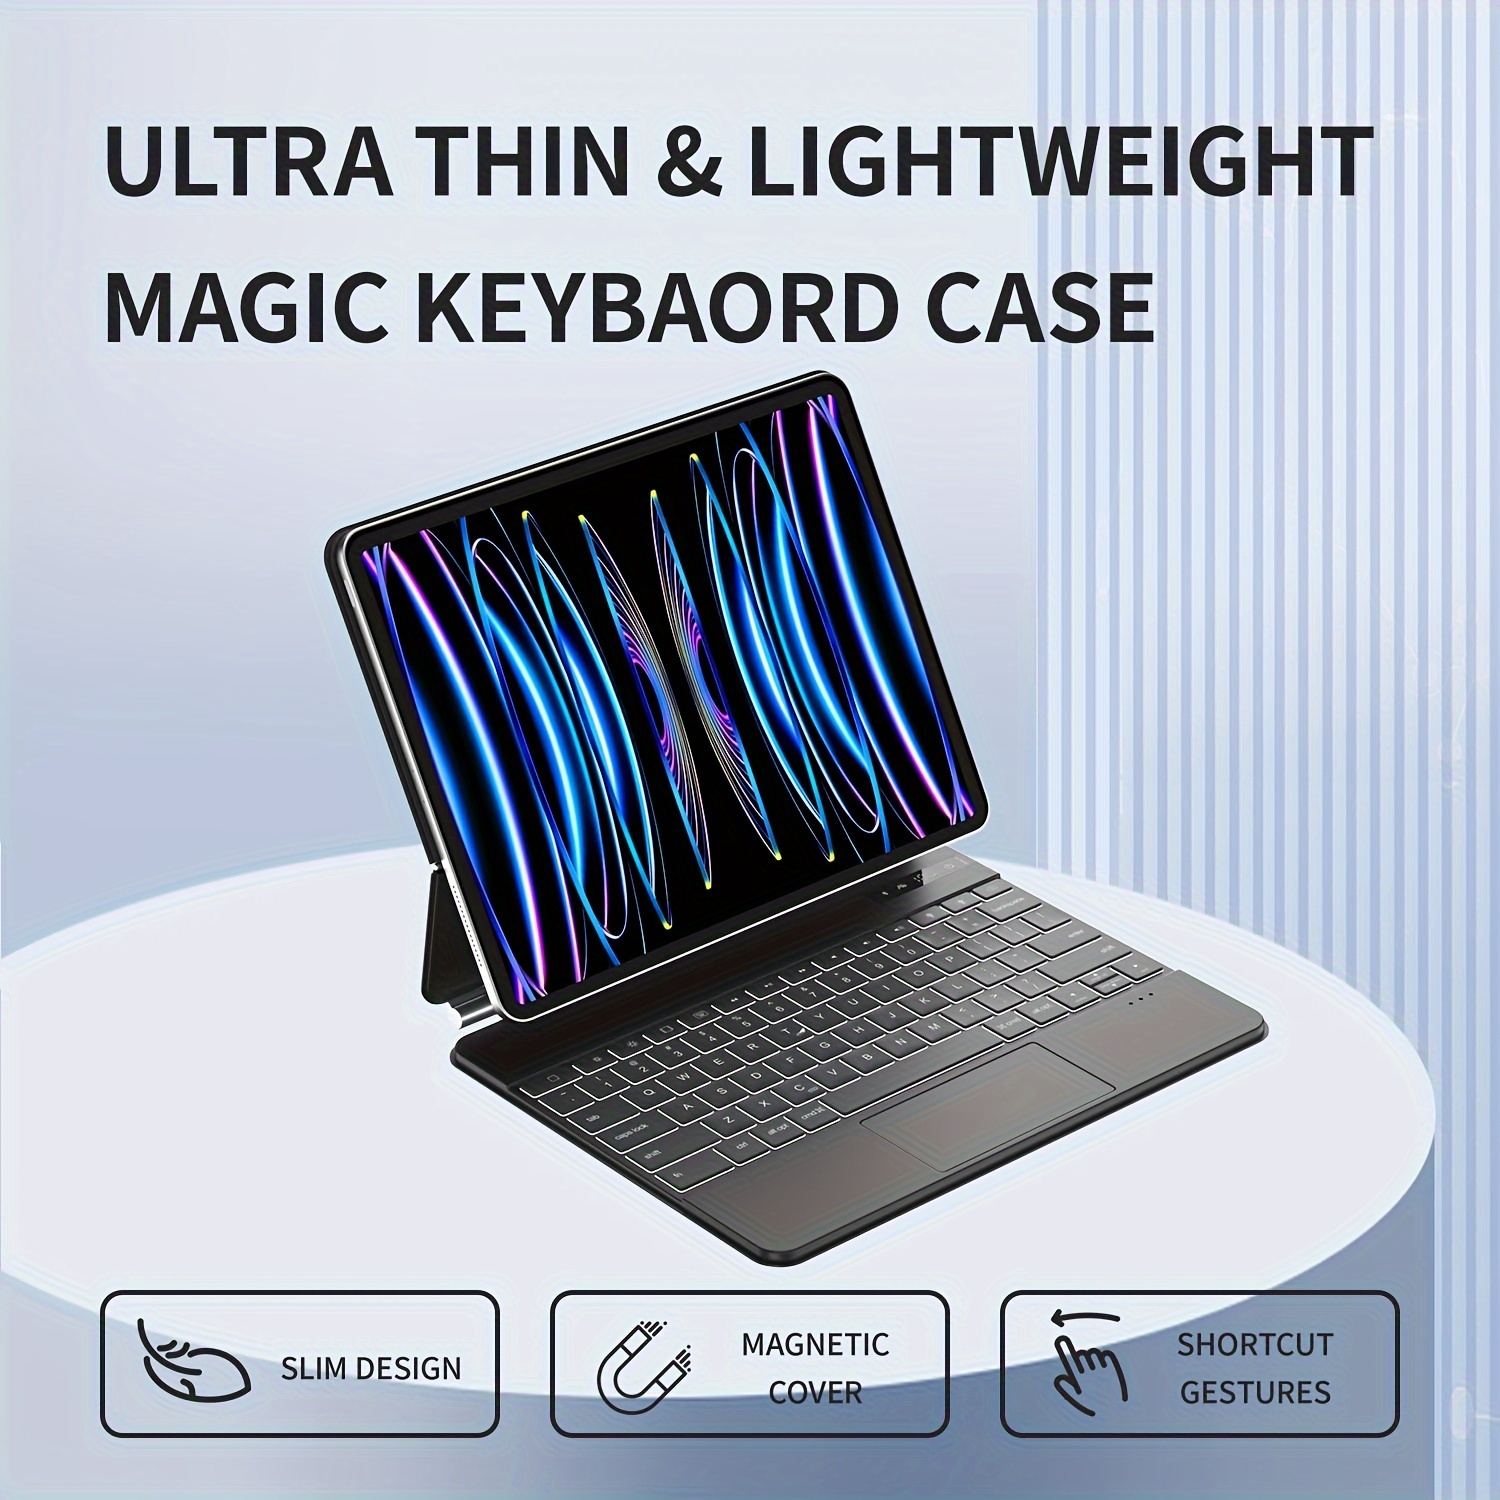 Magnetic Keyboard Case For IPad Pro 12.9‑inch (3rd, 4th, 5th Gen - 2018,  2020, 2022), Magic Keyboard Case With IPadOS Shortcuts, Floating Cantilever  Stand, With Backlit, Multi-Touch Trackpad